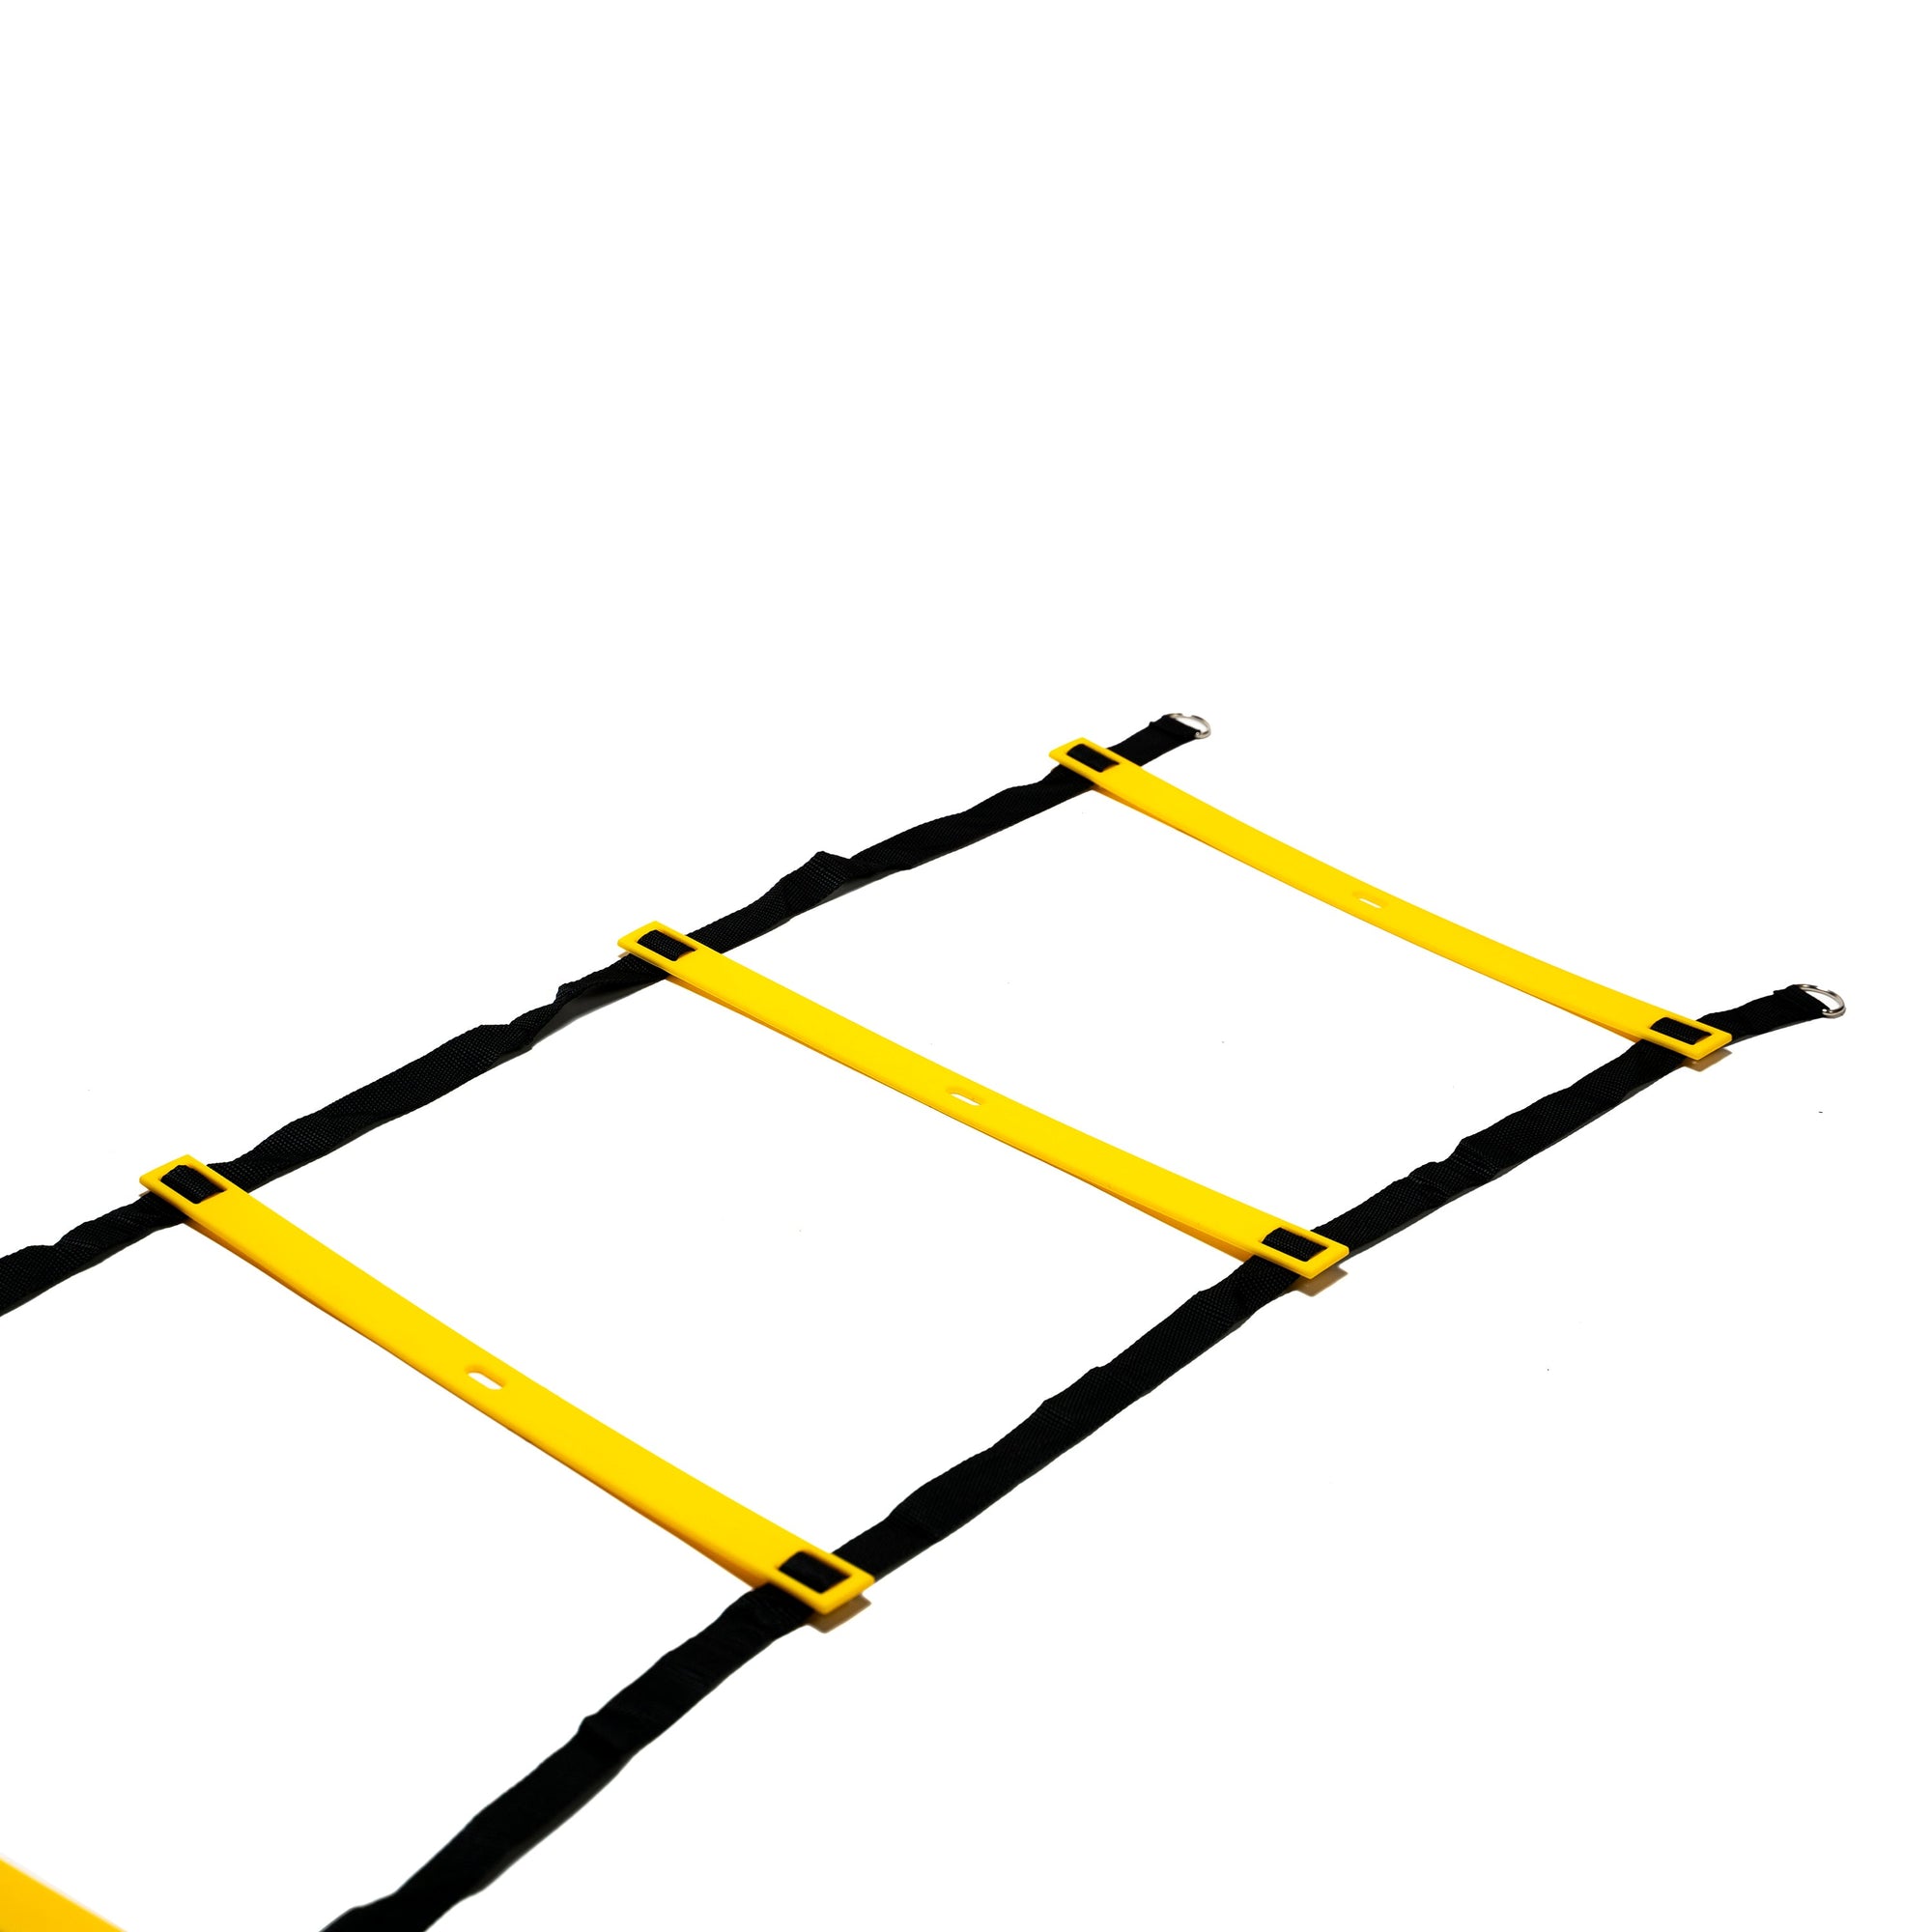 FitWay Equip. 15' Agility Ladder